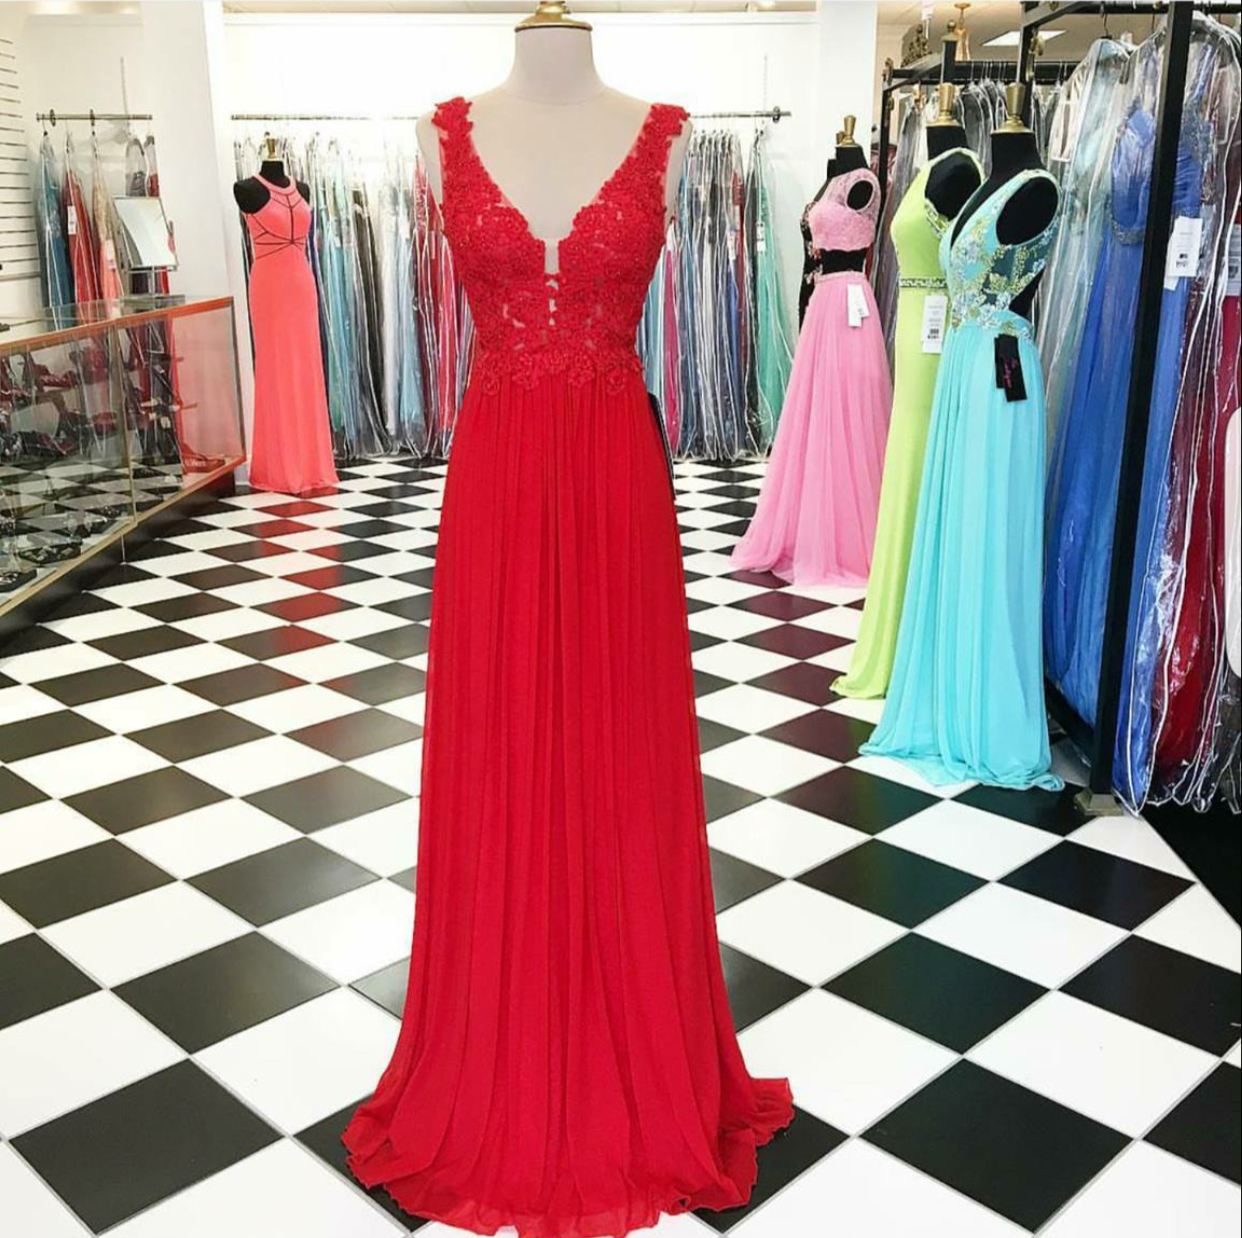 Long Red Chiffon Formal Dresses Featuring Lace Applique Bodice With V Neckline - Sexy Evening Gown,long Elegant Prom Dresses